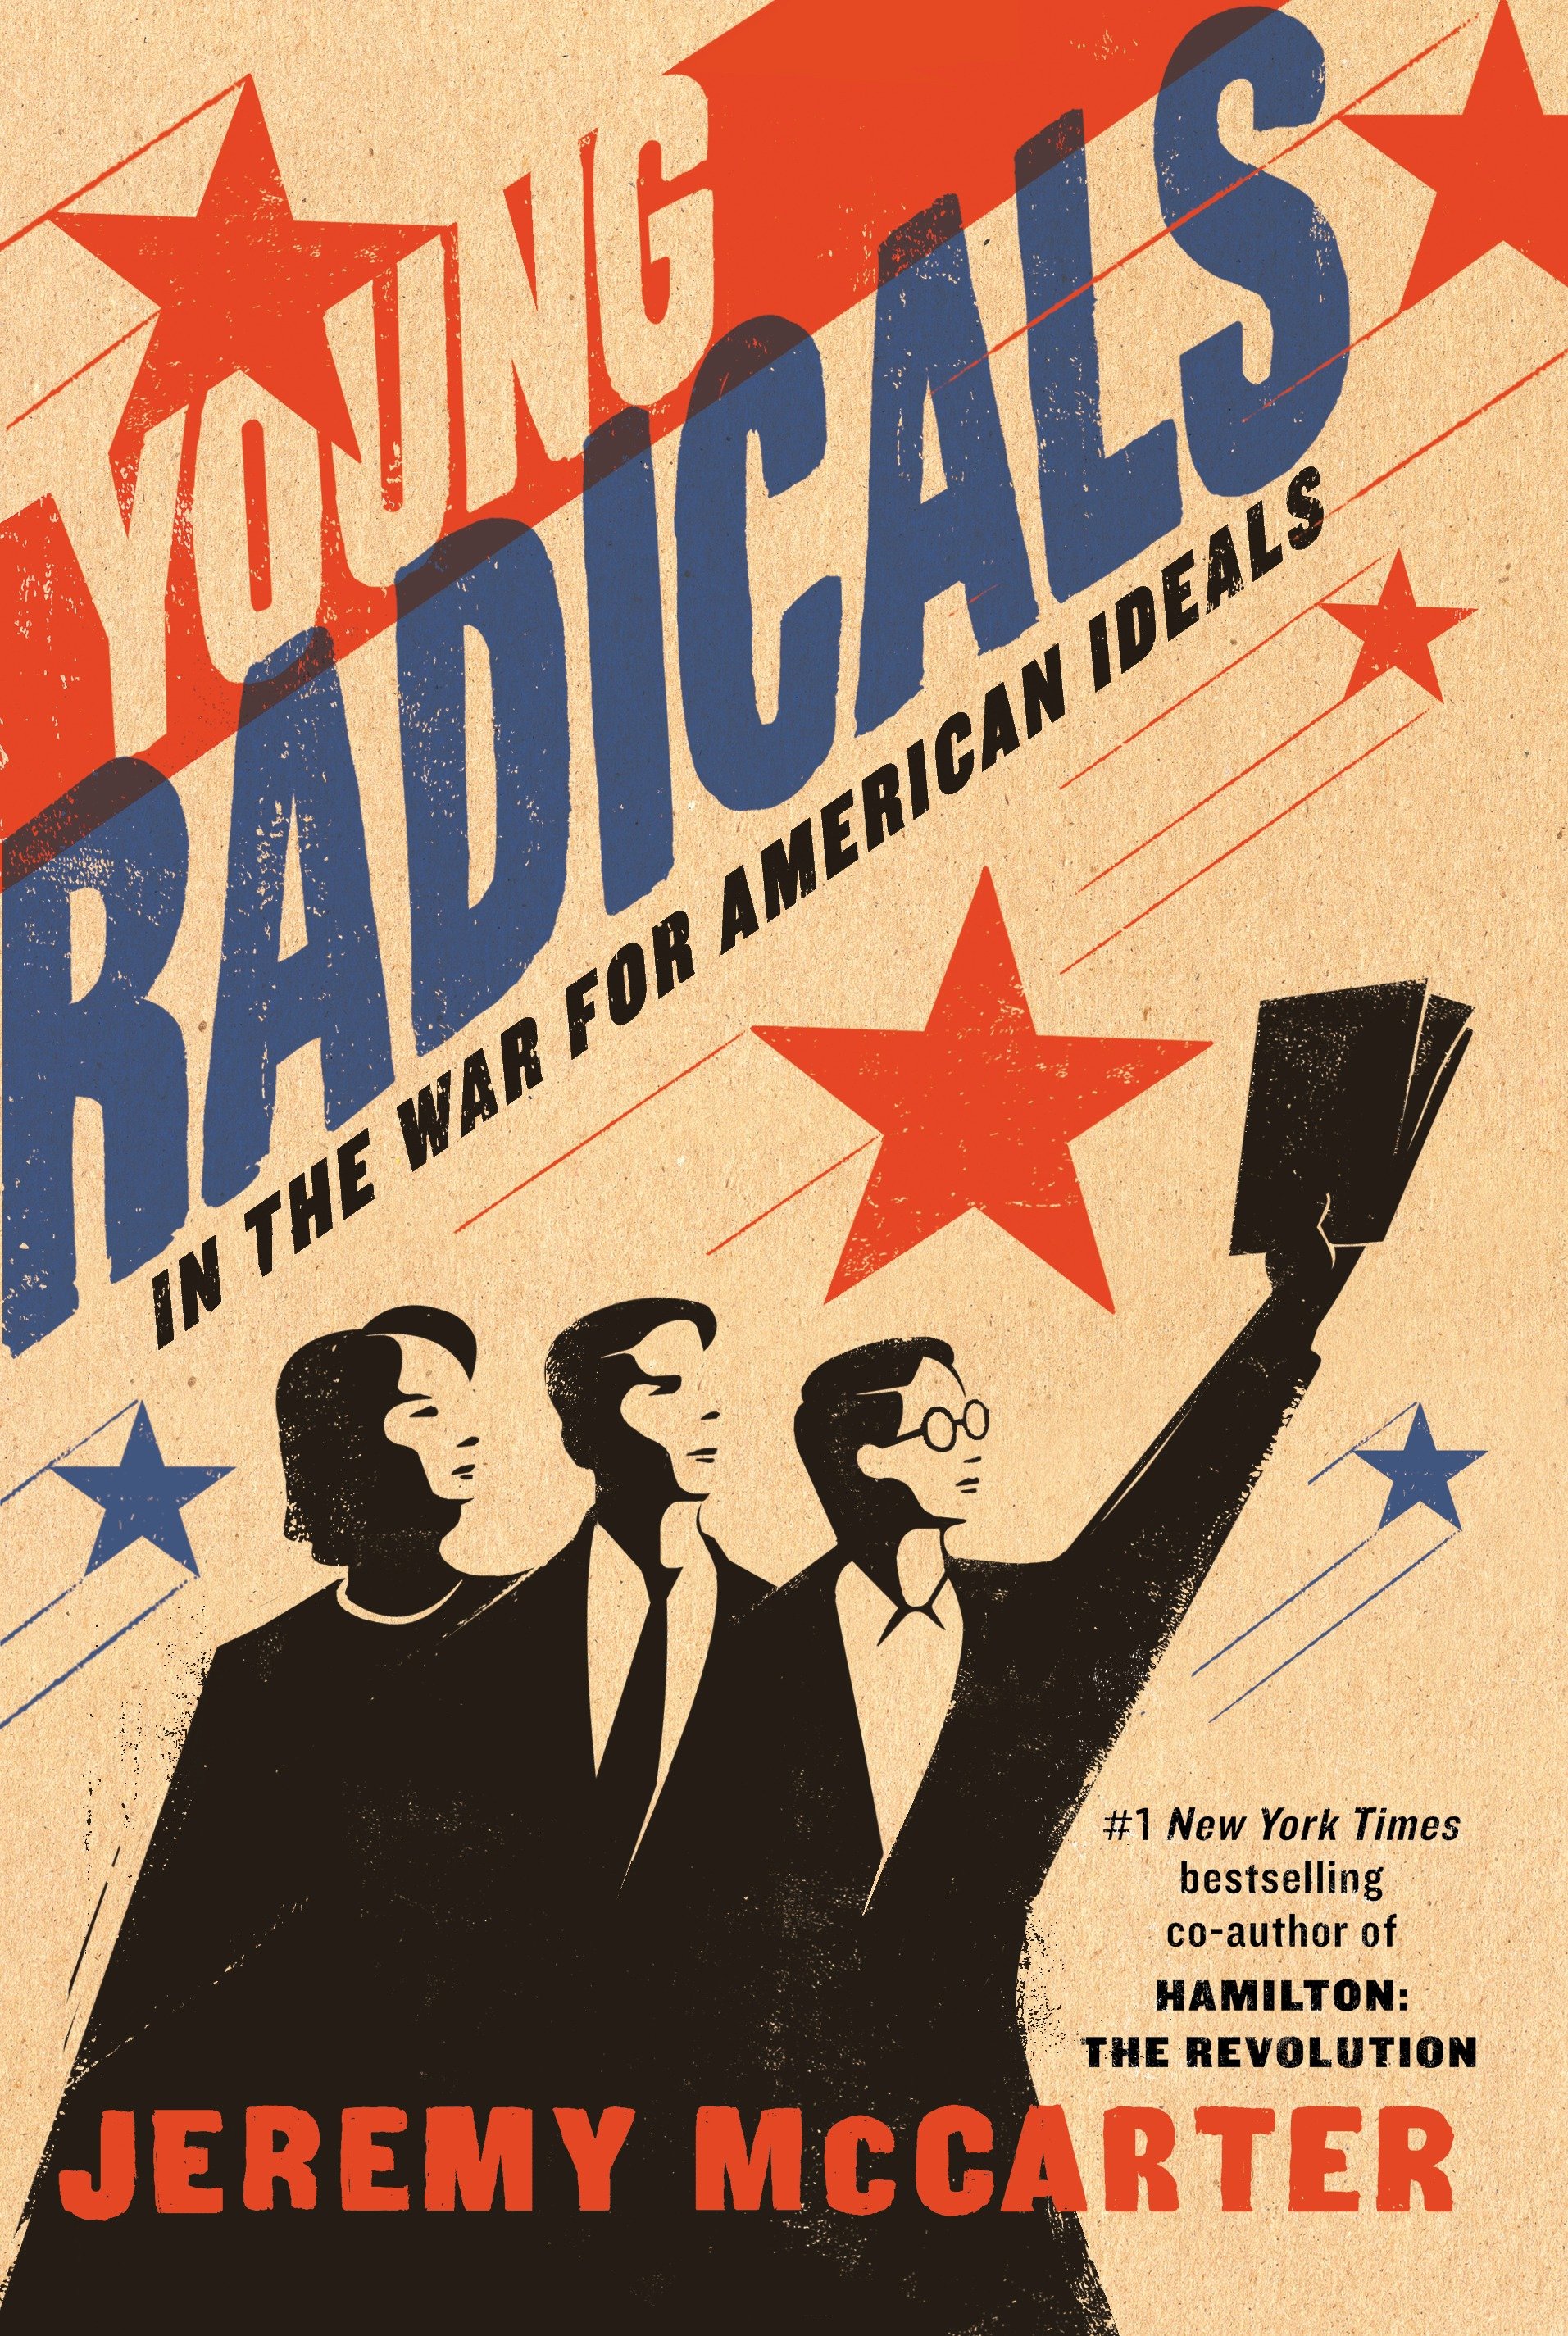 Young radicals in the war for American ideals cover image